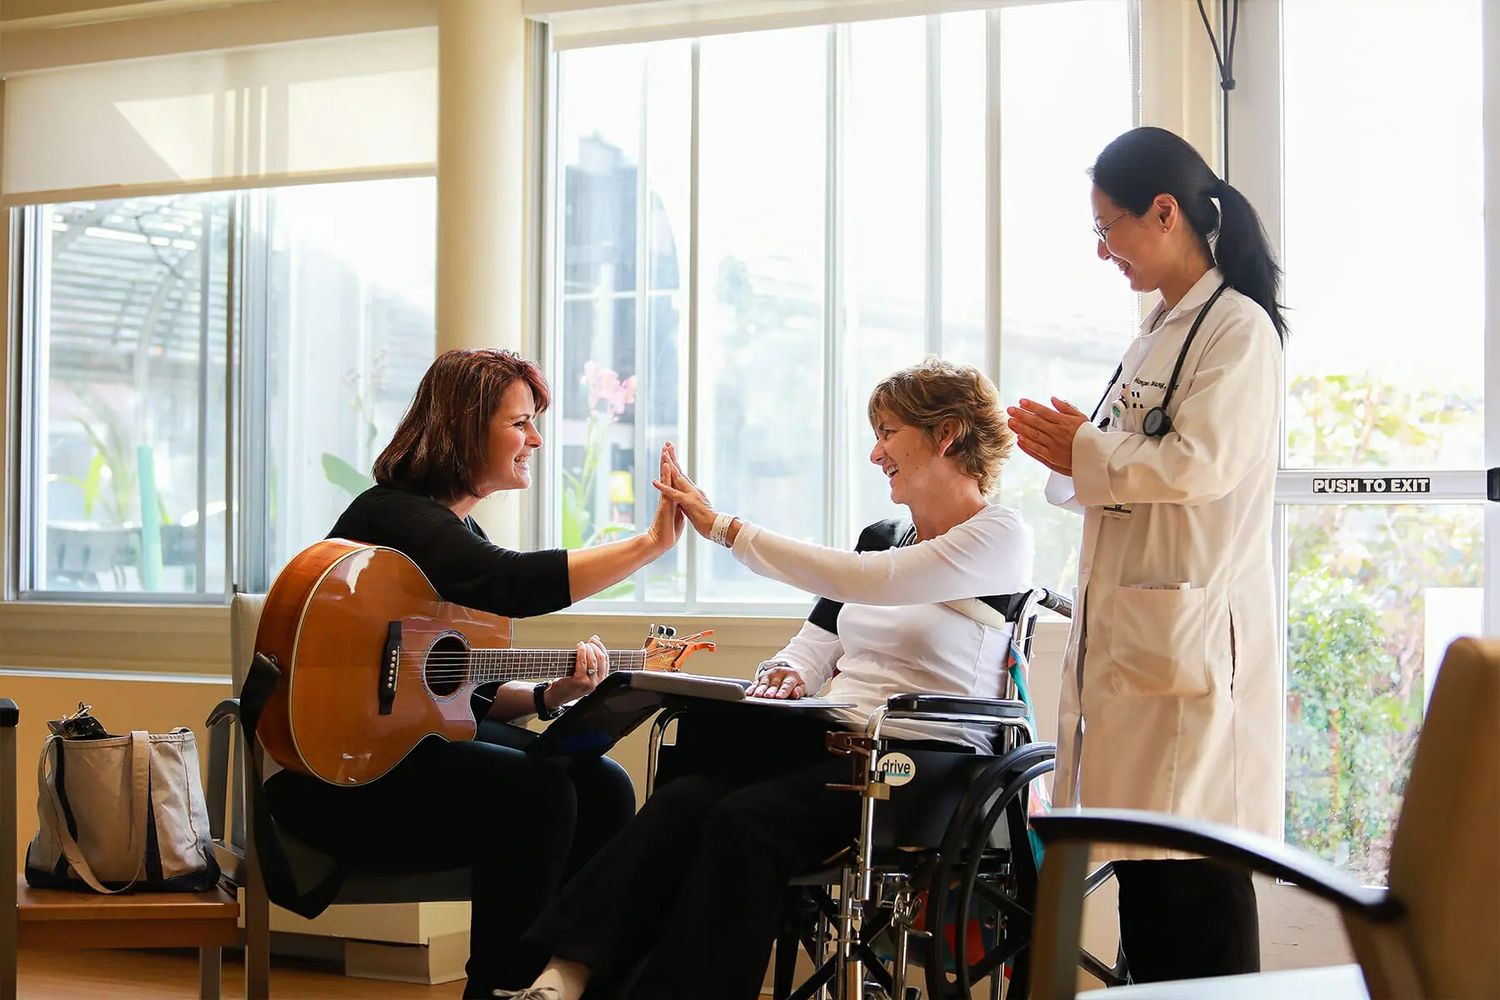 What Health Care Model Has Music Therapy